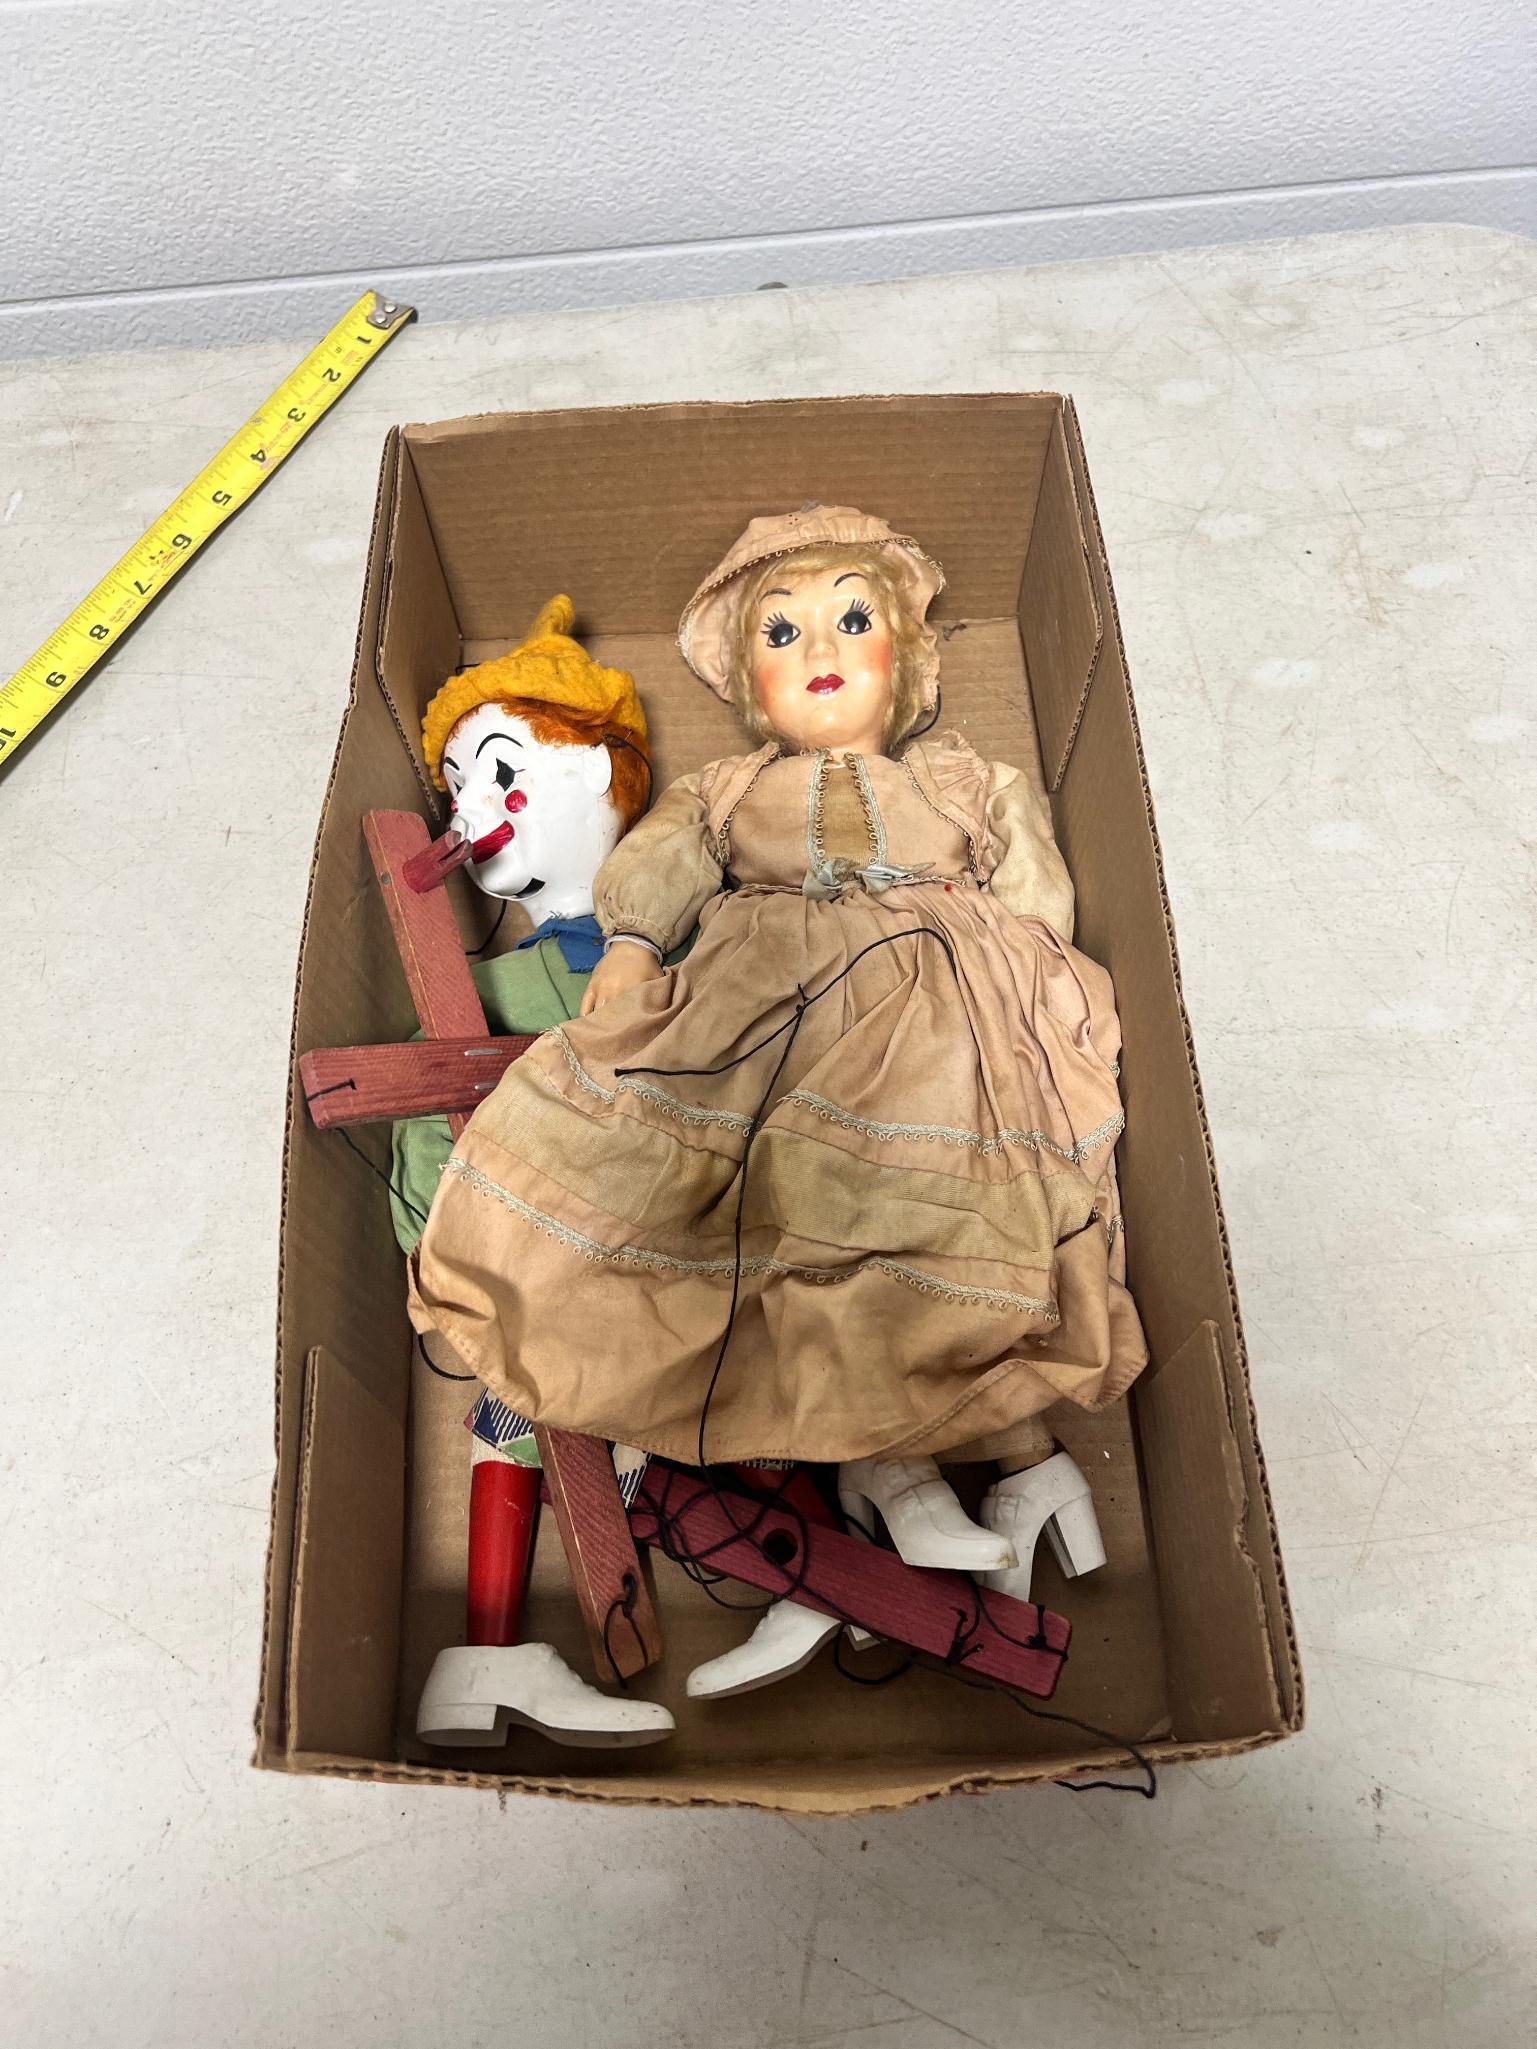 Vintage Marionettes 2 total in project condition